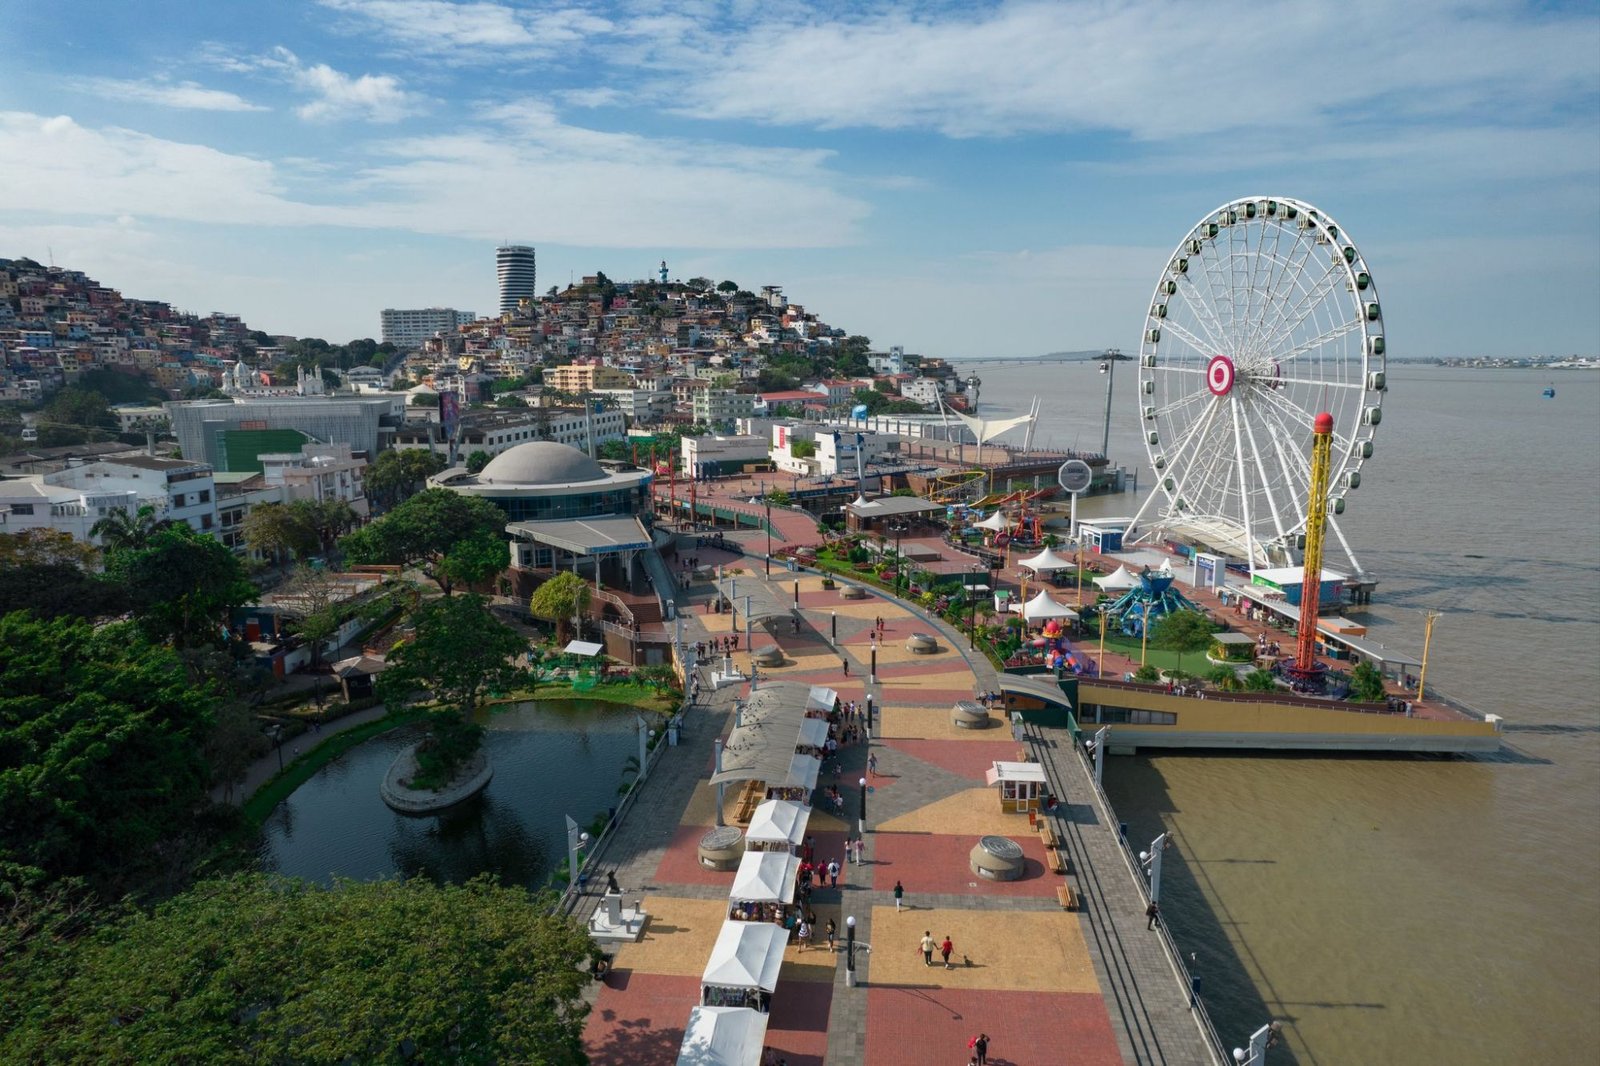 Things to do in Guayaquil